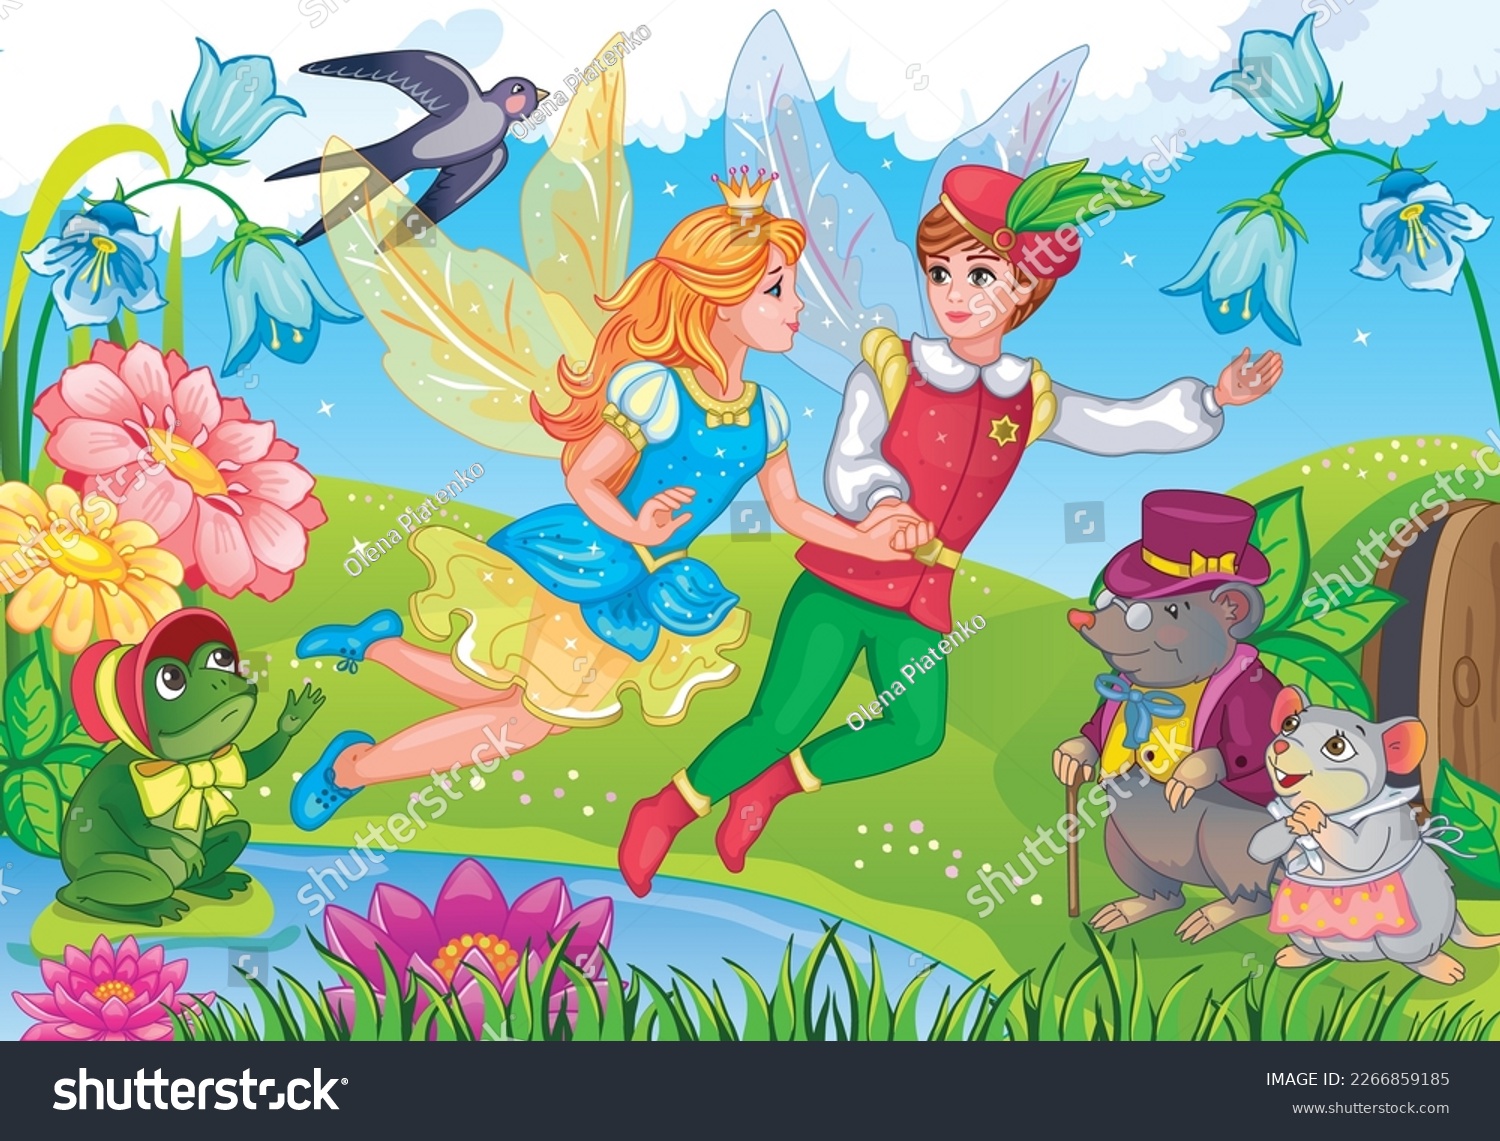 SVG of Thumbelina and little prince. Elf Princess. Fairy tale background. Flower meadow and rainbow. Fabulous landscape. Cinderella and magical animals. Children illustration for wallpapers, puzzles. Vector. svg